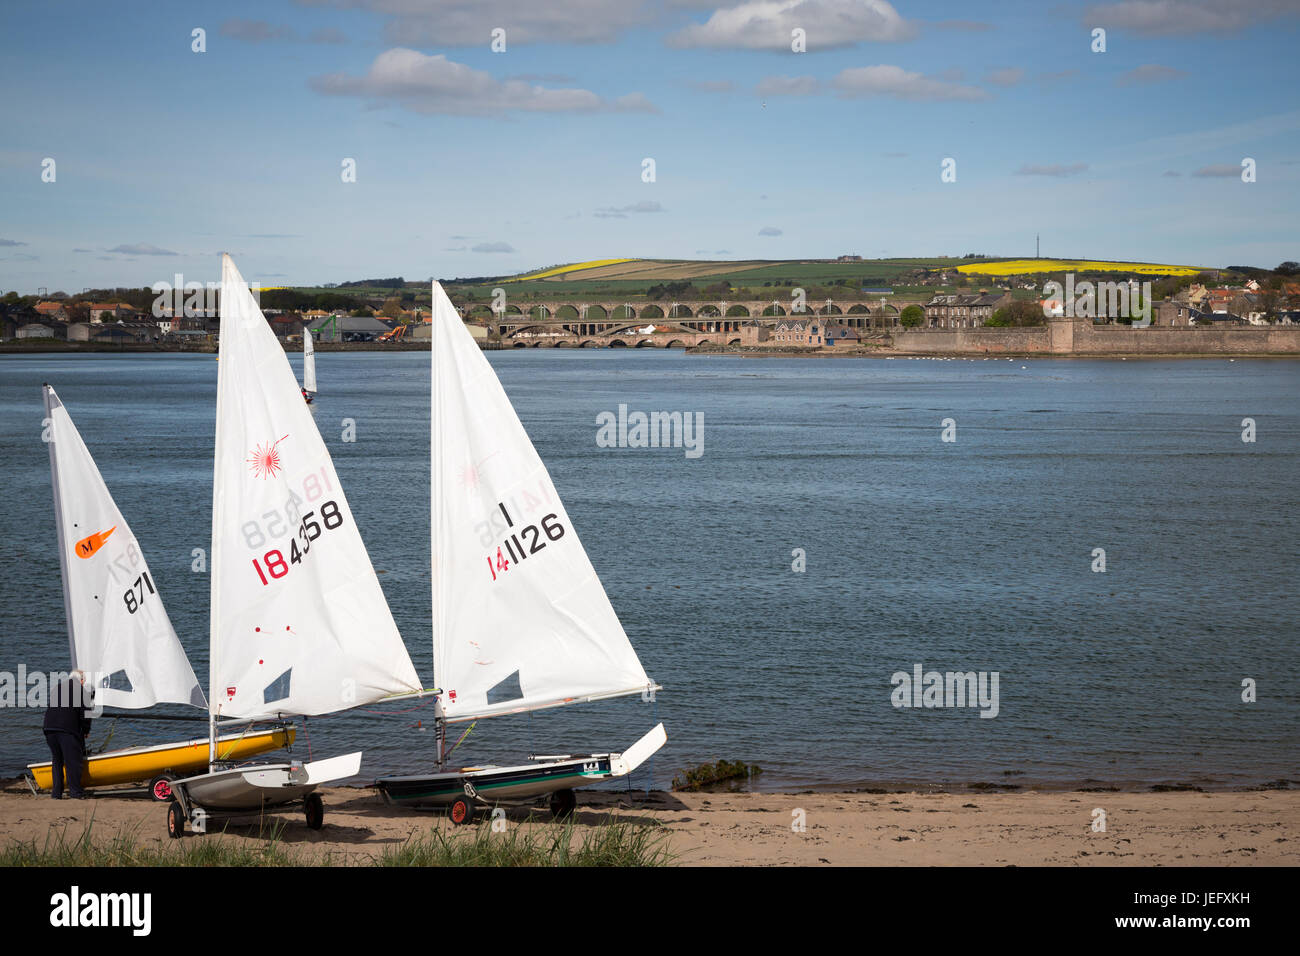 Sail boats by the river Tweed at Spittal, Northumberland, England, UK, Europe. Stock Photo